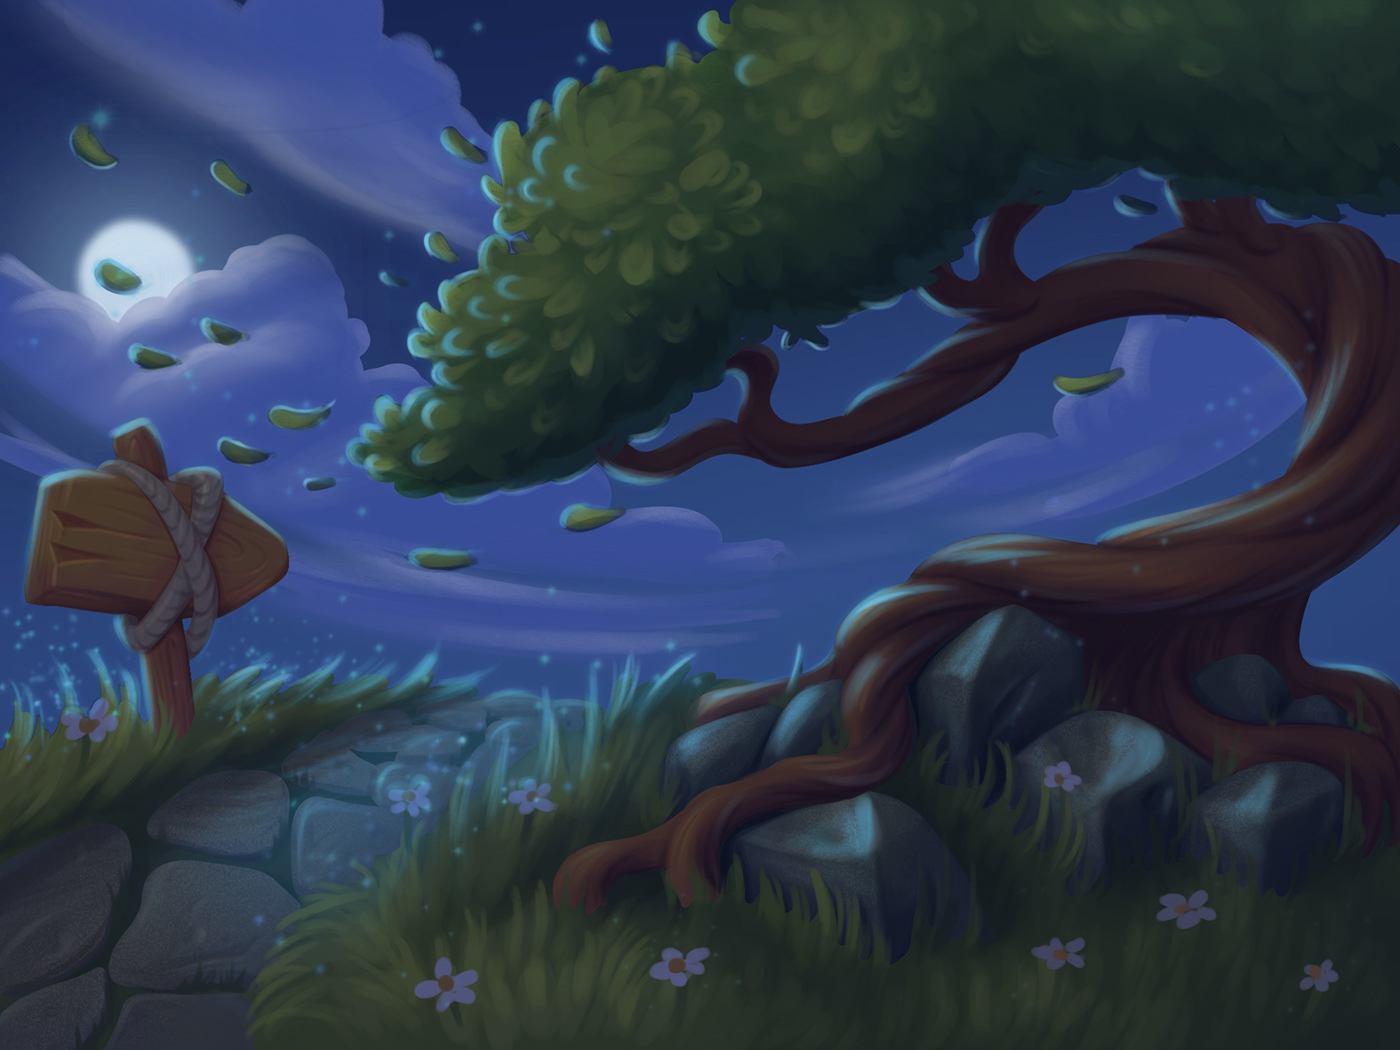 background game Nature scenery ILLUSTRATION  Game for Kids Day Evening night drawing process Illustration for a book book for kids For Kids Bookstore